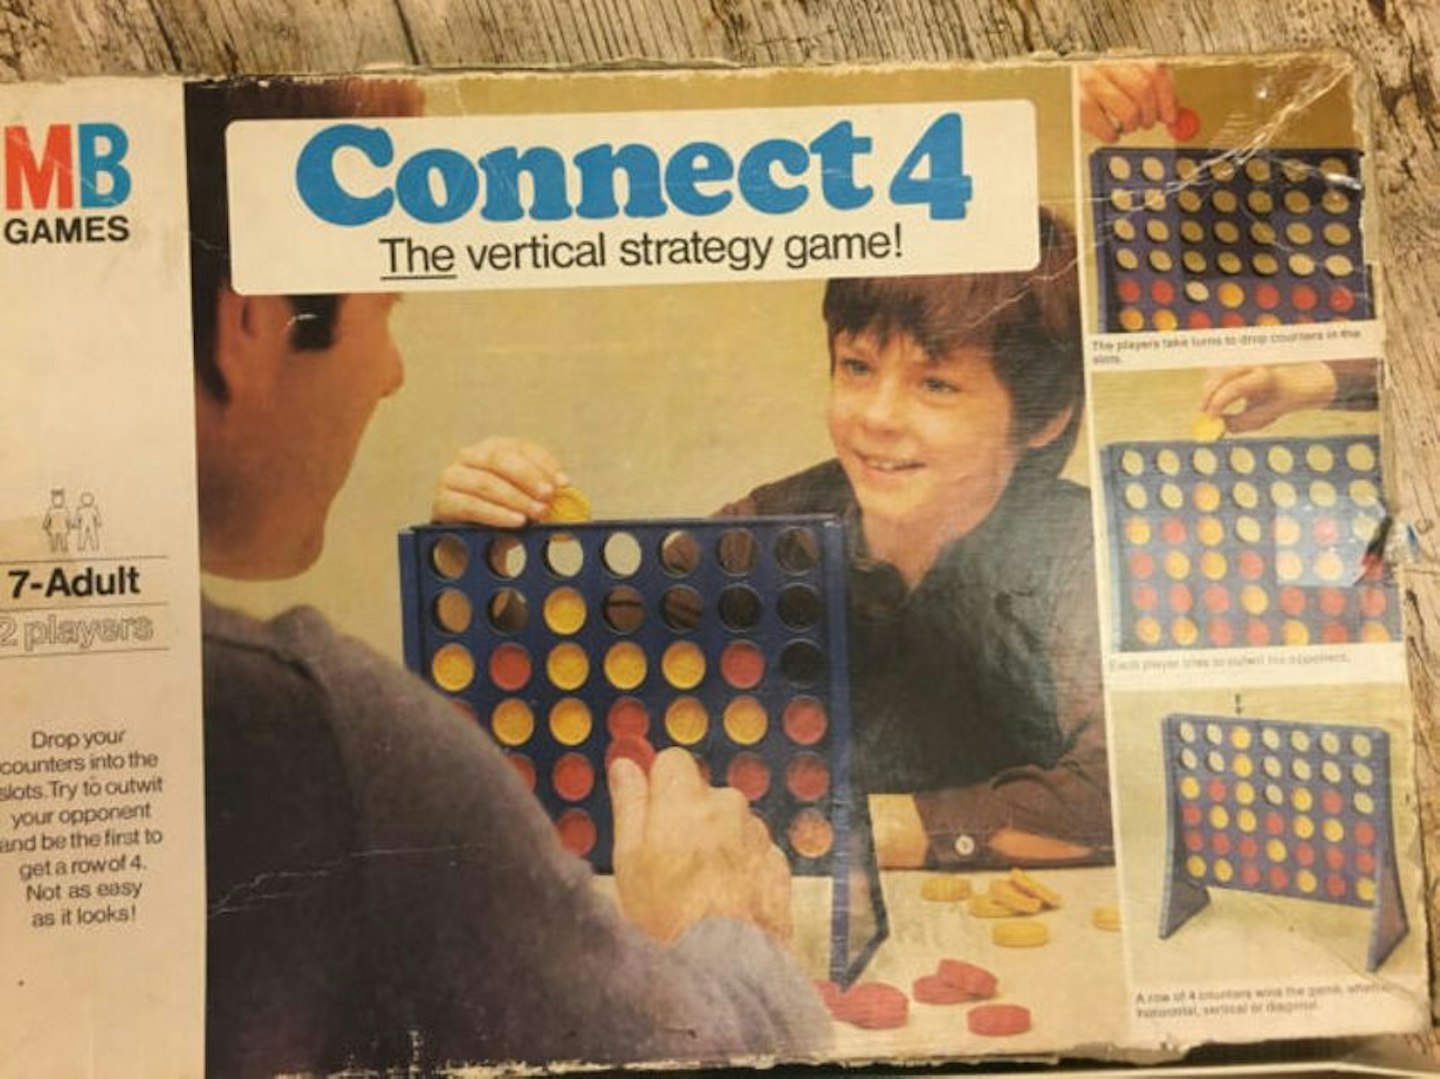 70s toys: Connect4